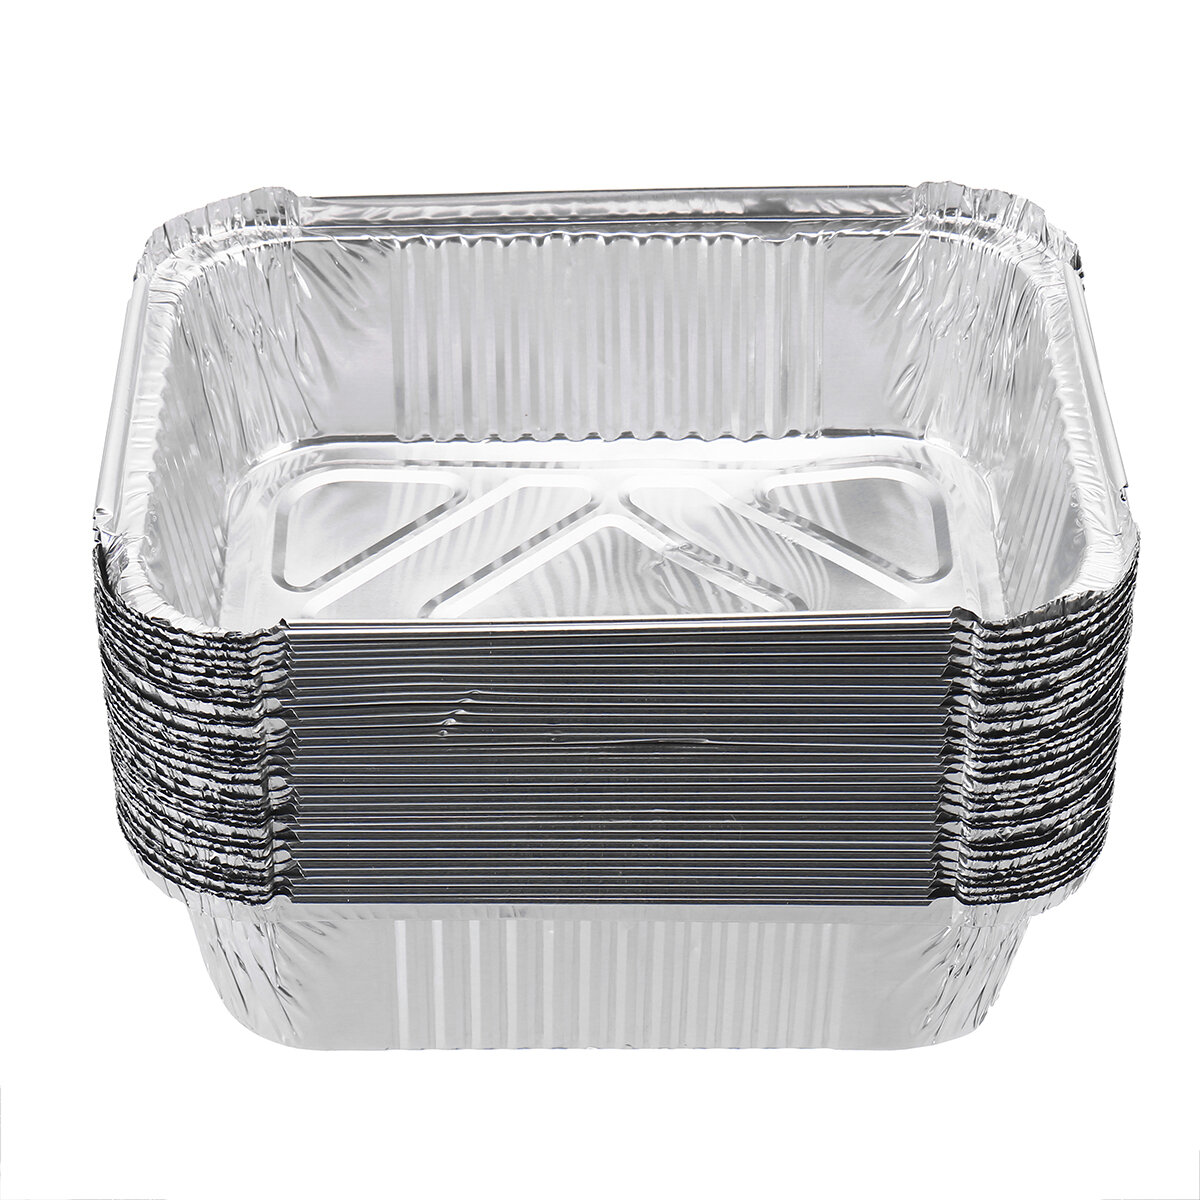 30pcs Disposable Foil Trays Dishes Catering Containers Takeaway Oven Baking Tray